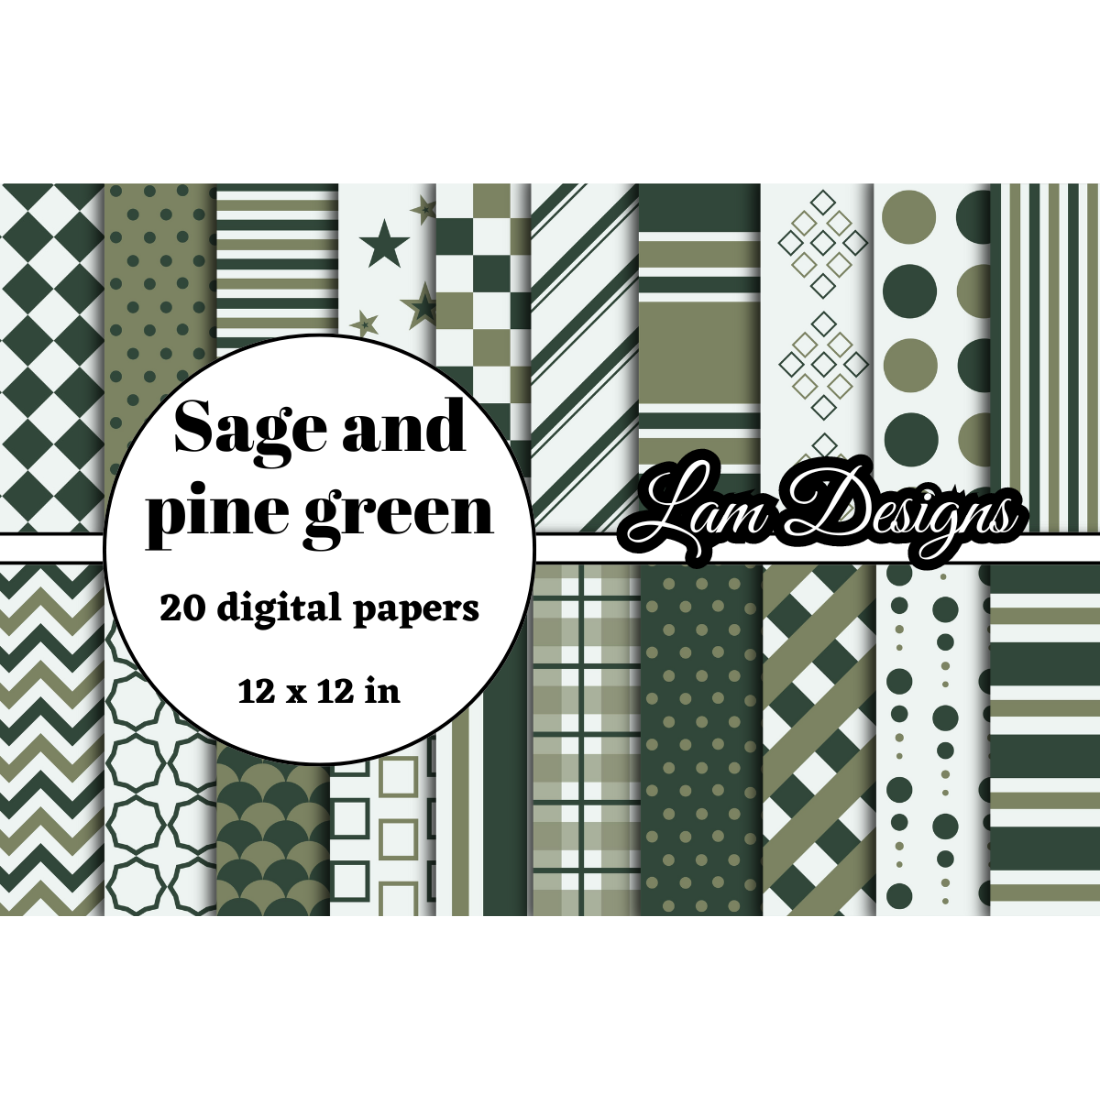 Sage and pine green digital papers preview image.